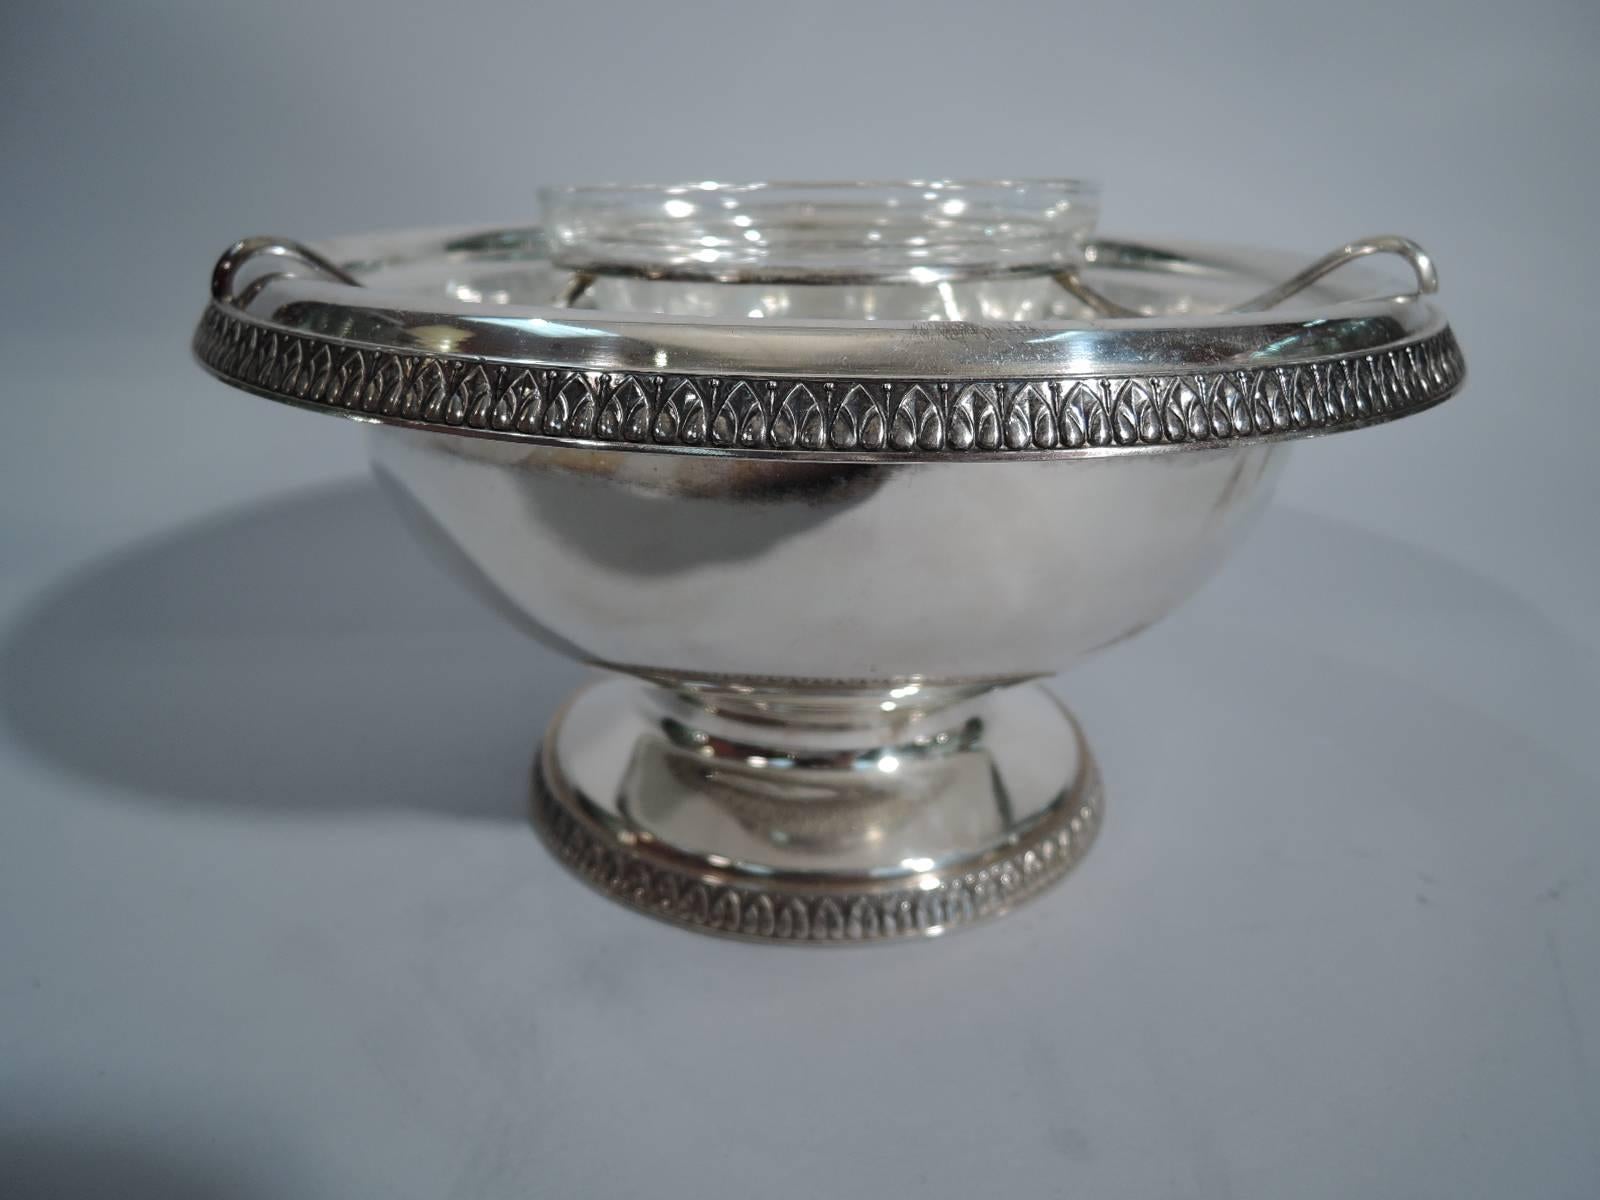 Classical sterling silver caviar bowl. Made by Buccellati in Italy. Curved bowl with turned-down rim, short stem, and raised foot. Rims have applied leaf-and-dart ornament. With clear glass liner, sterling silver frame, and clear glass bowl. A